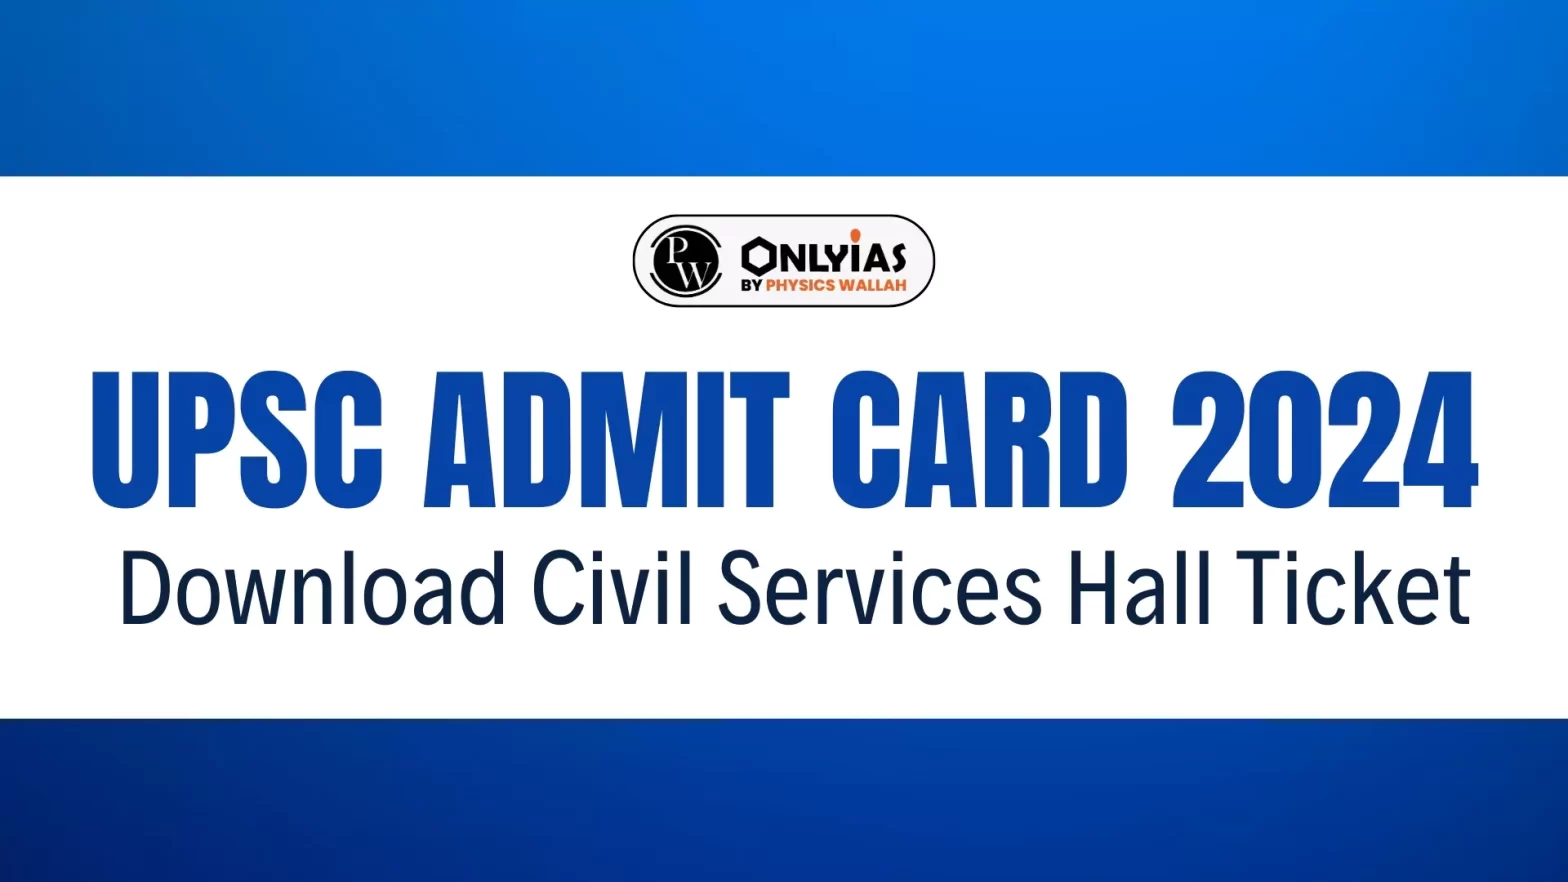 UPSC Admit Card 2024: Download Civil Services Hall Ticket